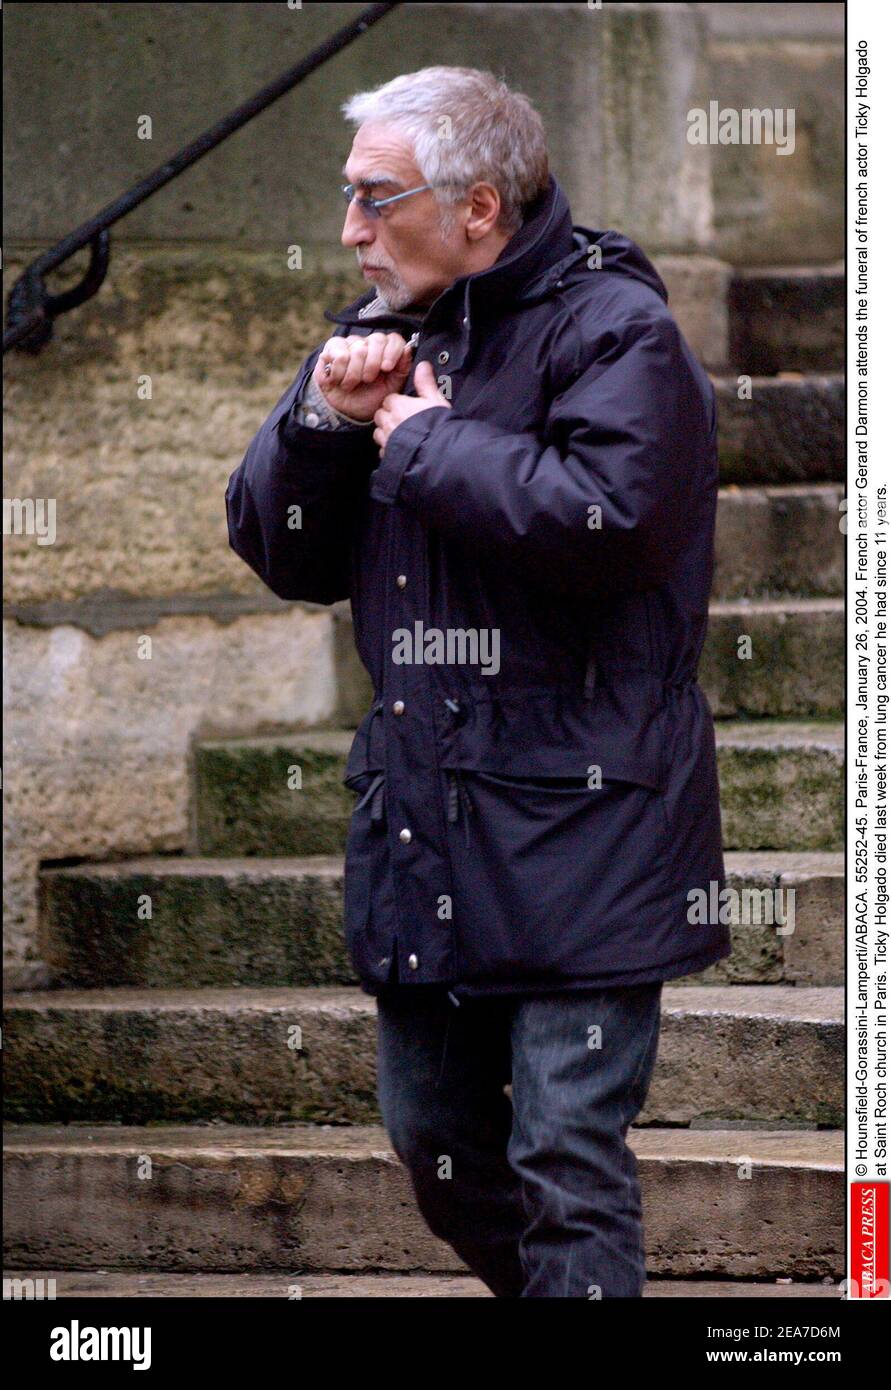 © Hounsfield-Gorassini-Lamperti/ABACA. 55252-45. Paris-France, January 26, 2004. French actor Gerard Darmon attends the funeral of french actor Ticky Holgado at Saint Roch church in Paris. Ticky Holgado died last week from lung cancer he had since 11 years. Stock Photo